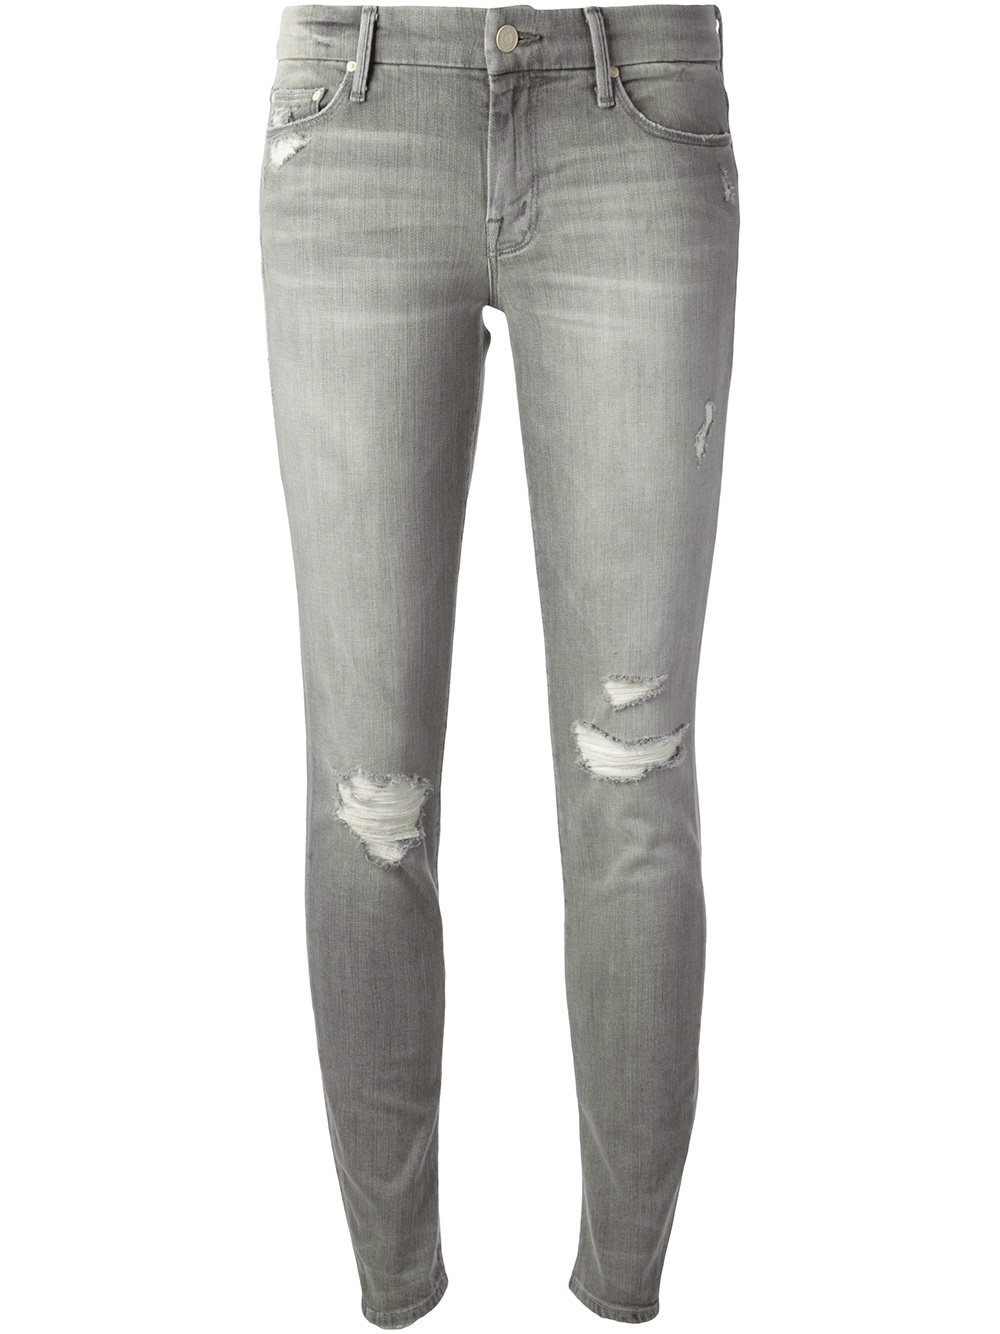 gray distressed skinny jeans